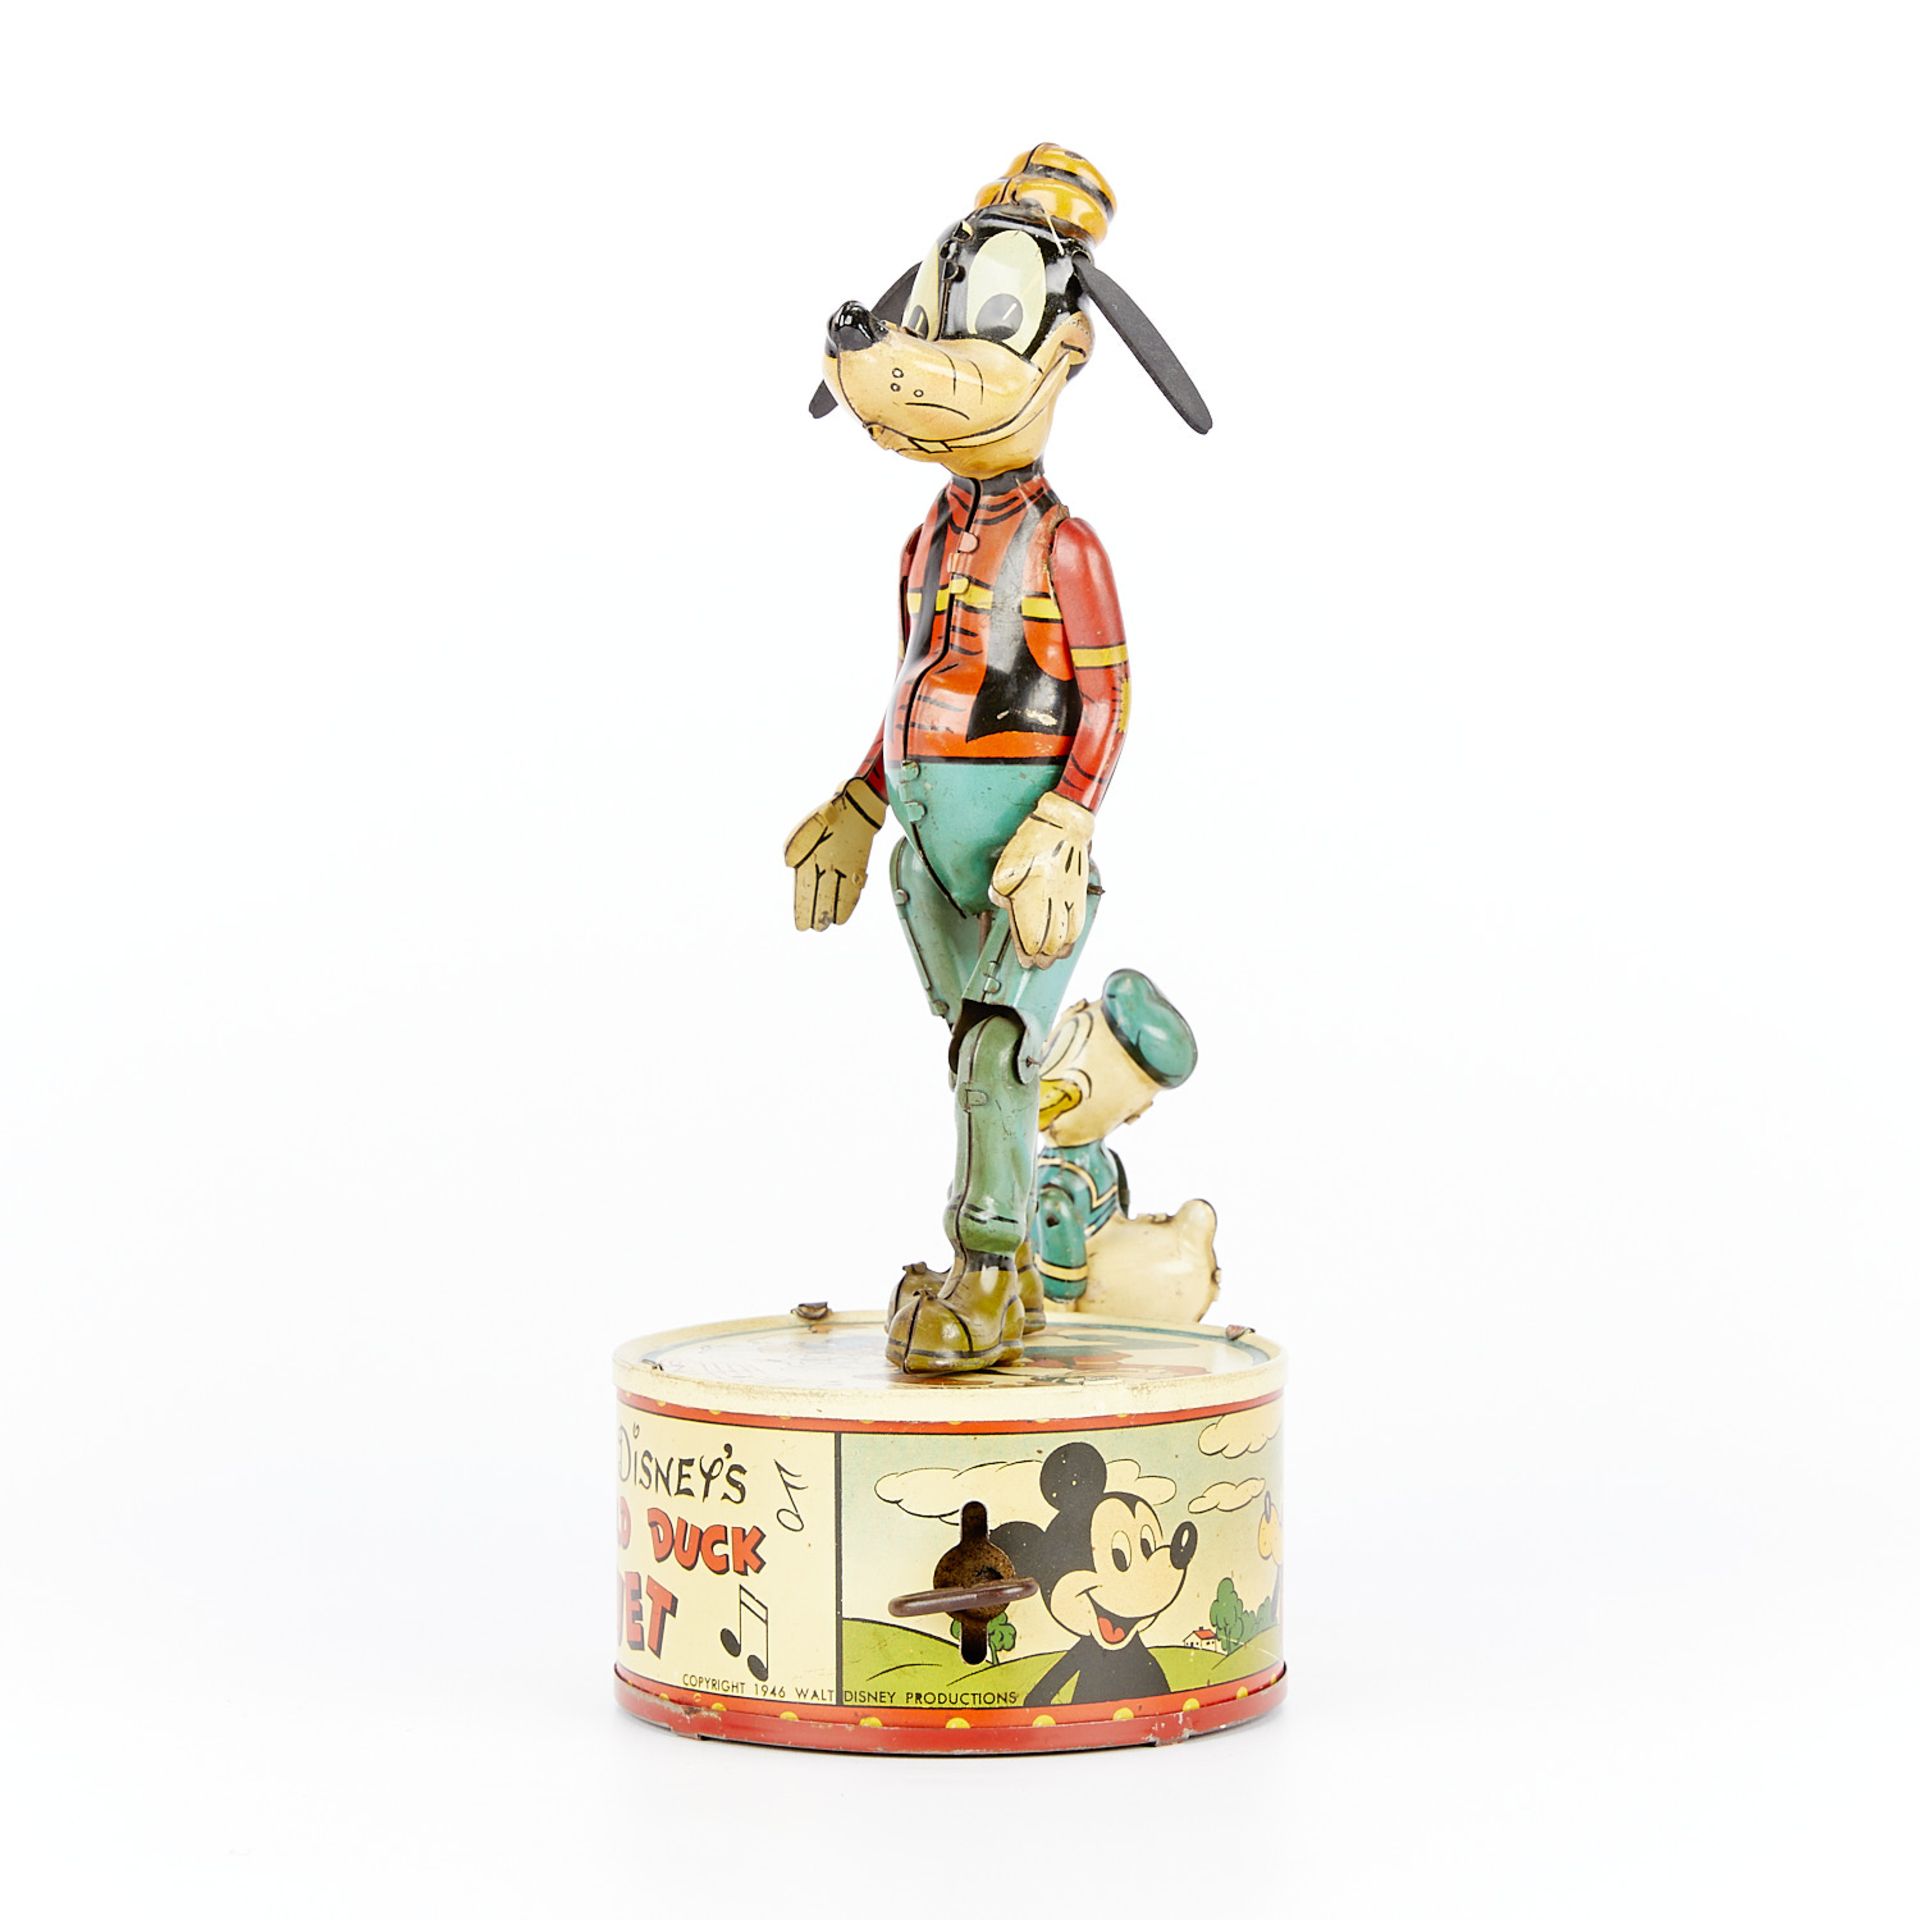 Marx "Disney's Donald Duck Duet" Tin Wind-up Toy - Image 5 of 11